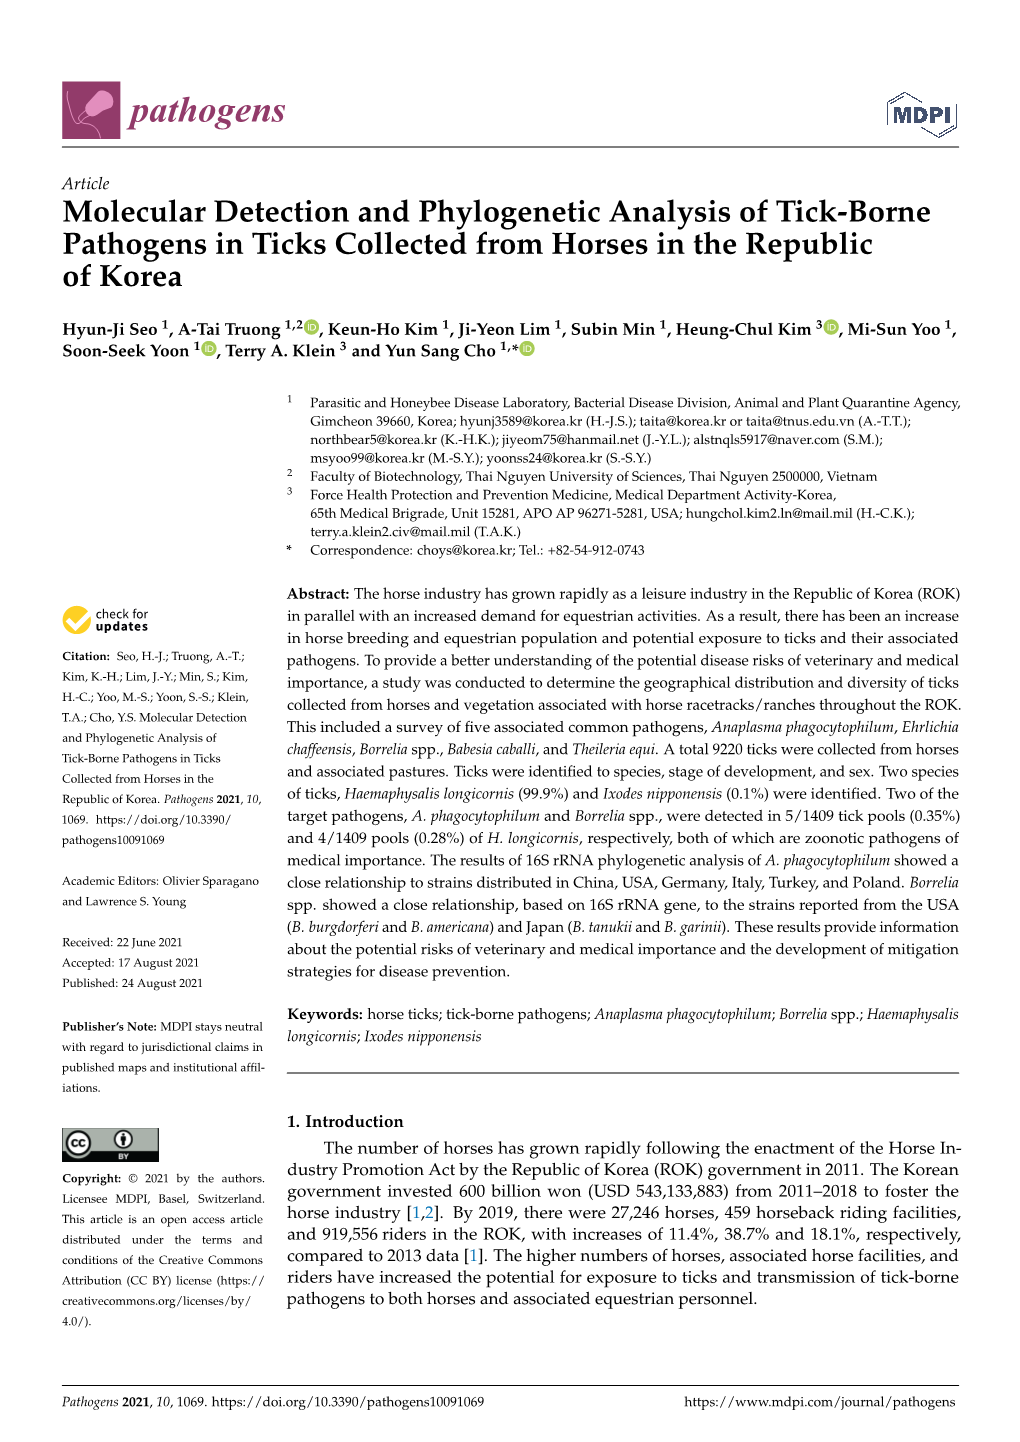 Molecular Detection and Phylogenetic Analysis of Tick-Borne Pathogens in Ticks Collected from Horses in the Republic of Korea